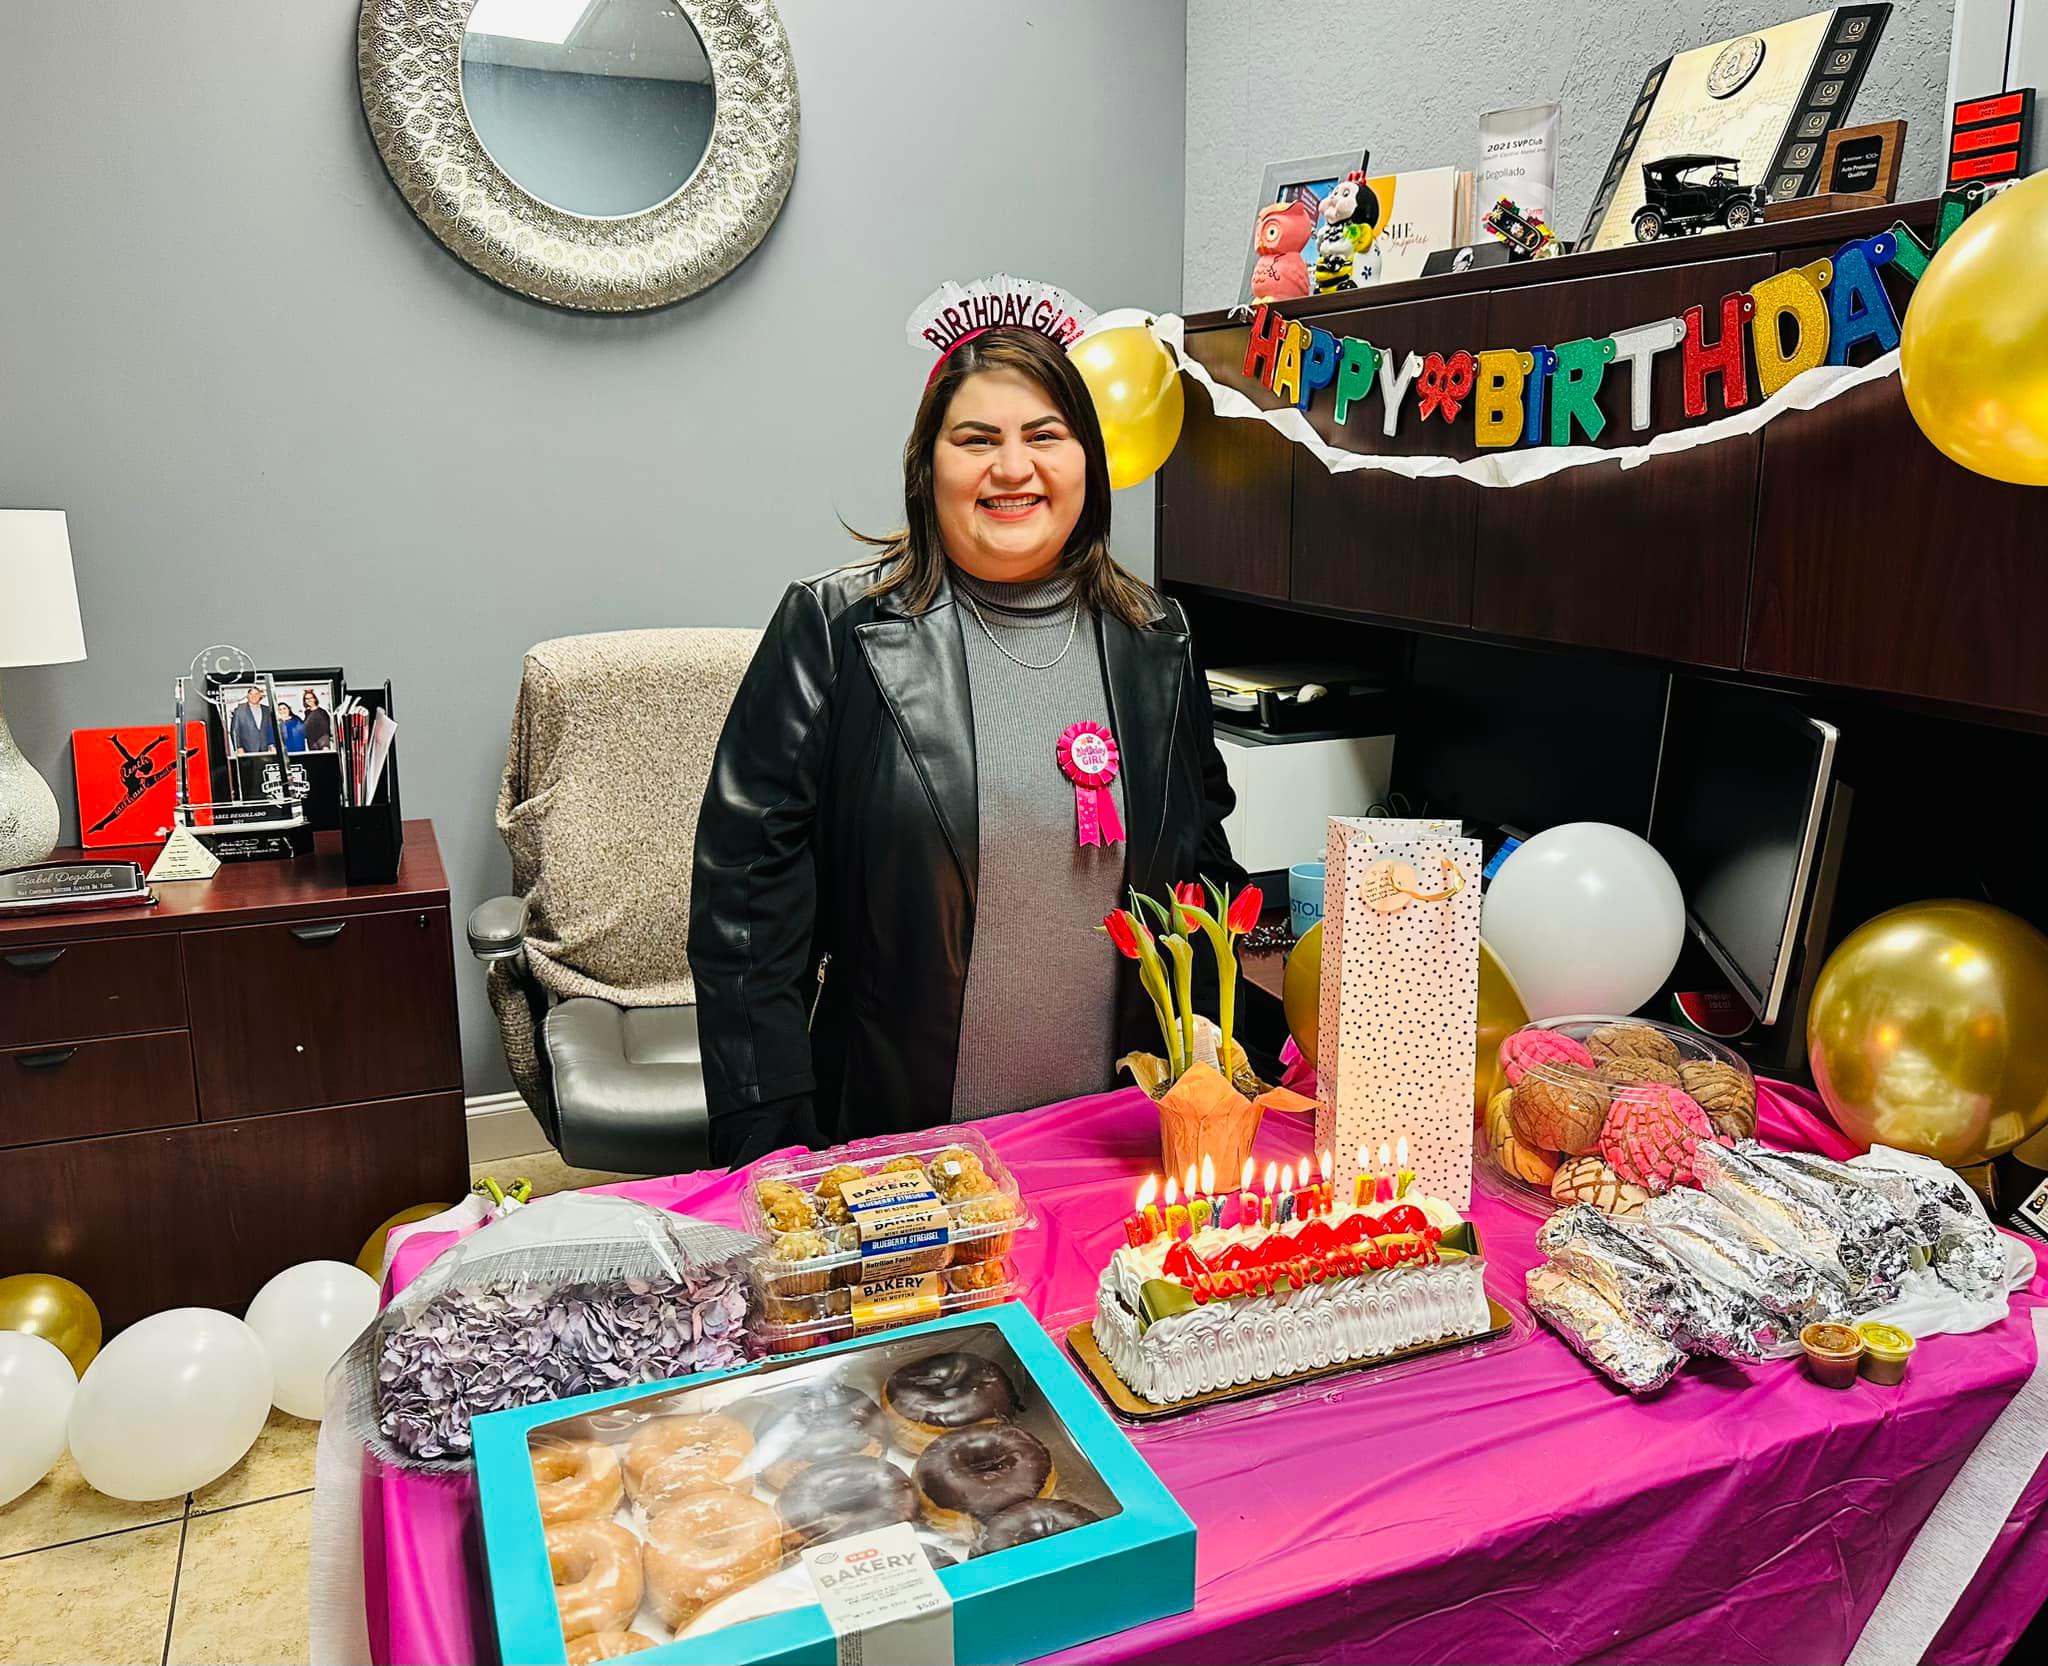 Happy Birthday Isabel!
Wishing you an amazing year of accomplishments, happiness and blessings.
Than Isabel Degollado - State Farm Insurance Agent San Antonio (210)438-5826